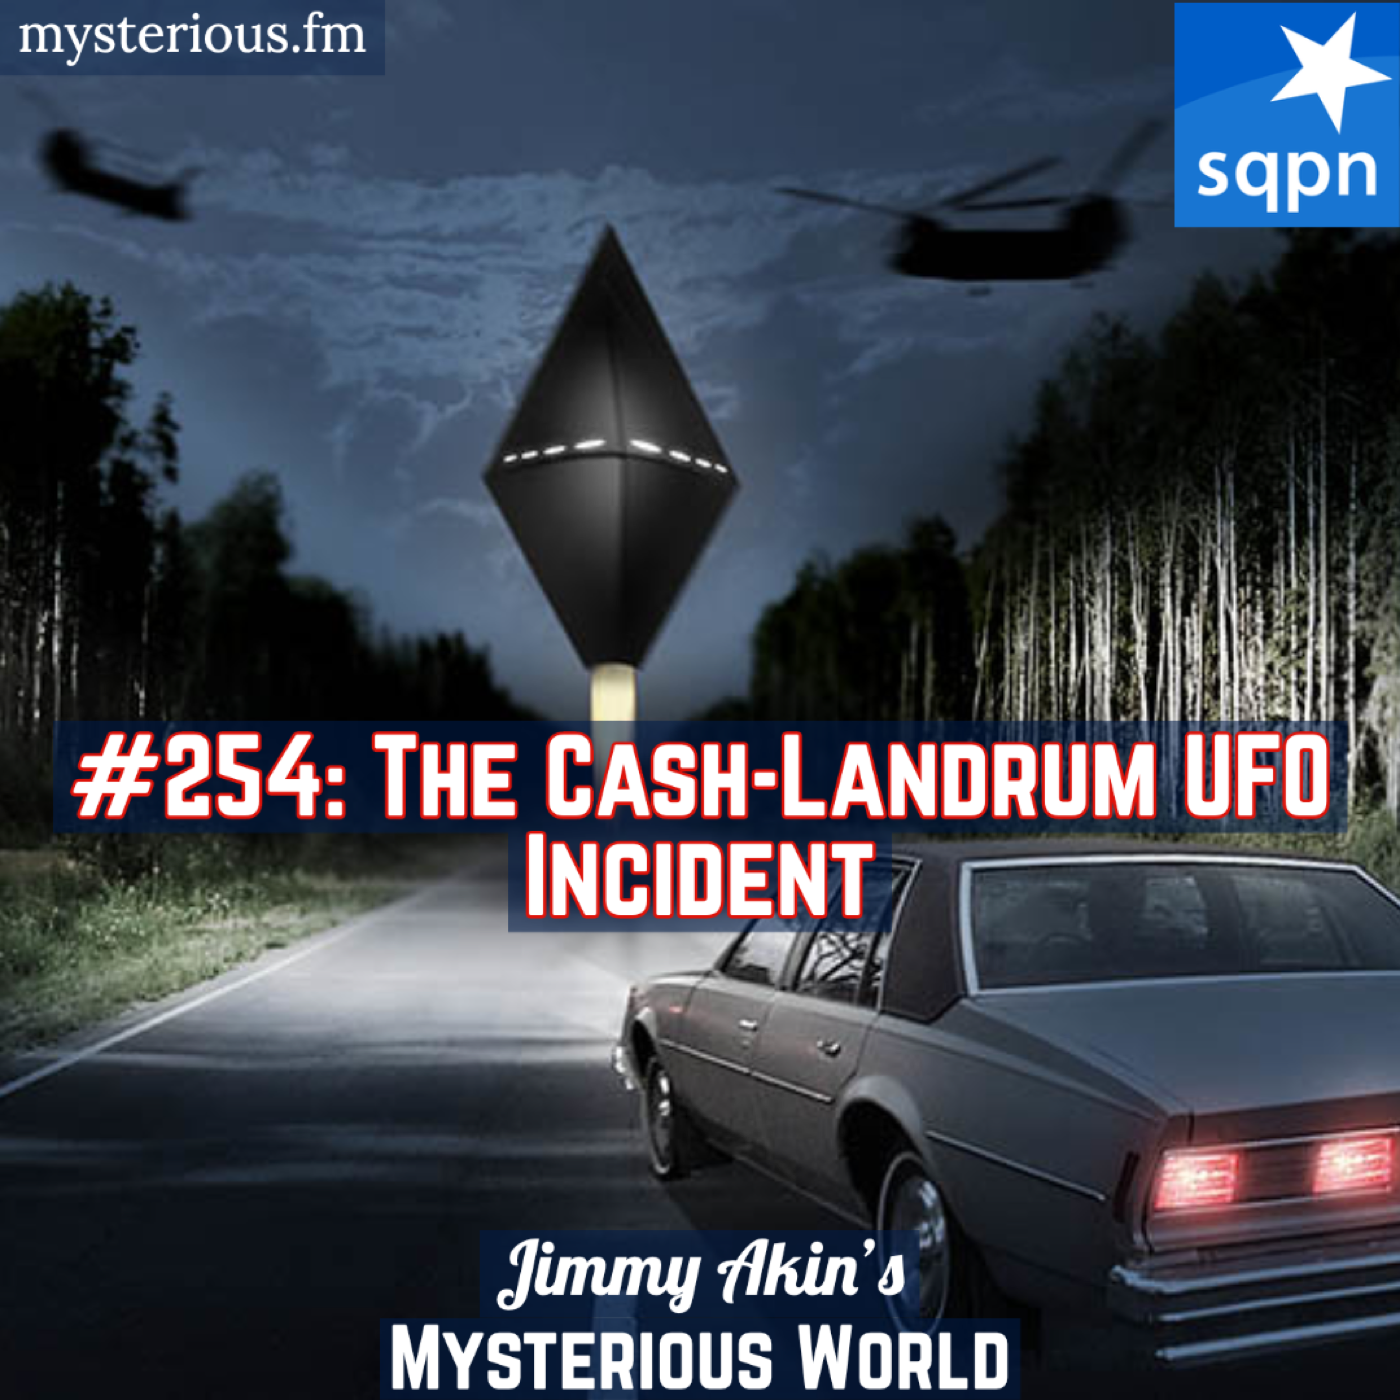 The Cash-Landrum UFO Incident (Radiation? Government Experiment? Cover-Up?)